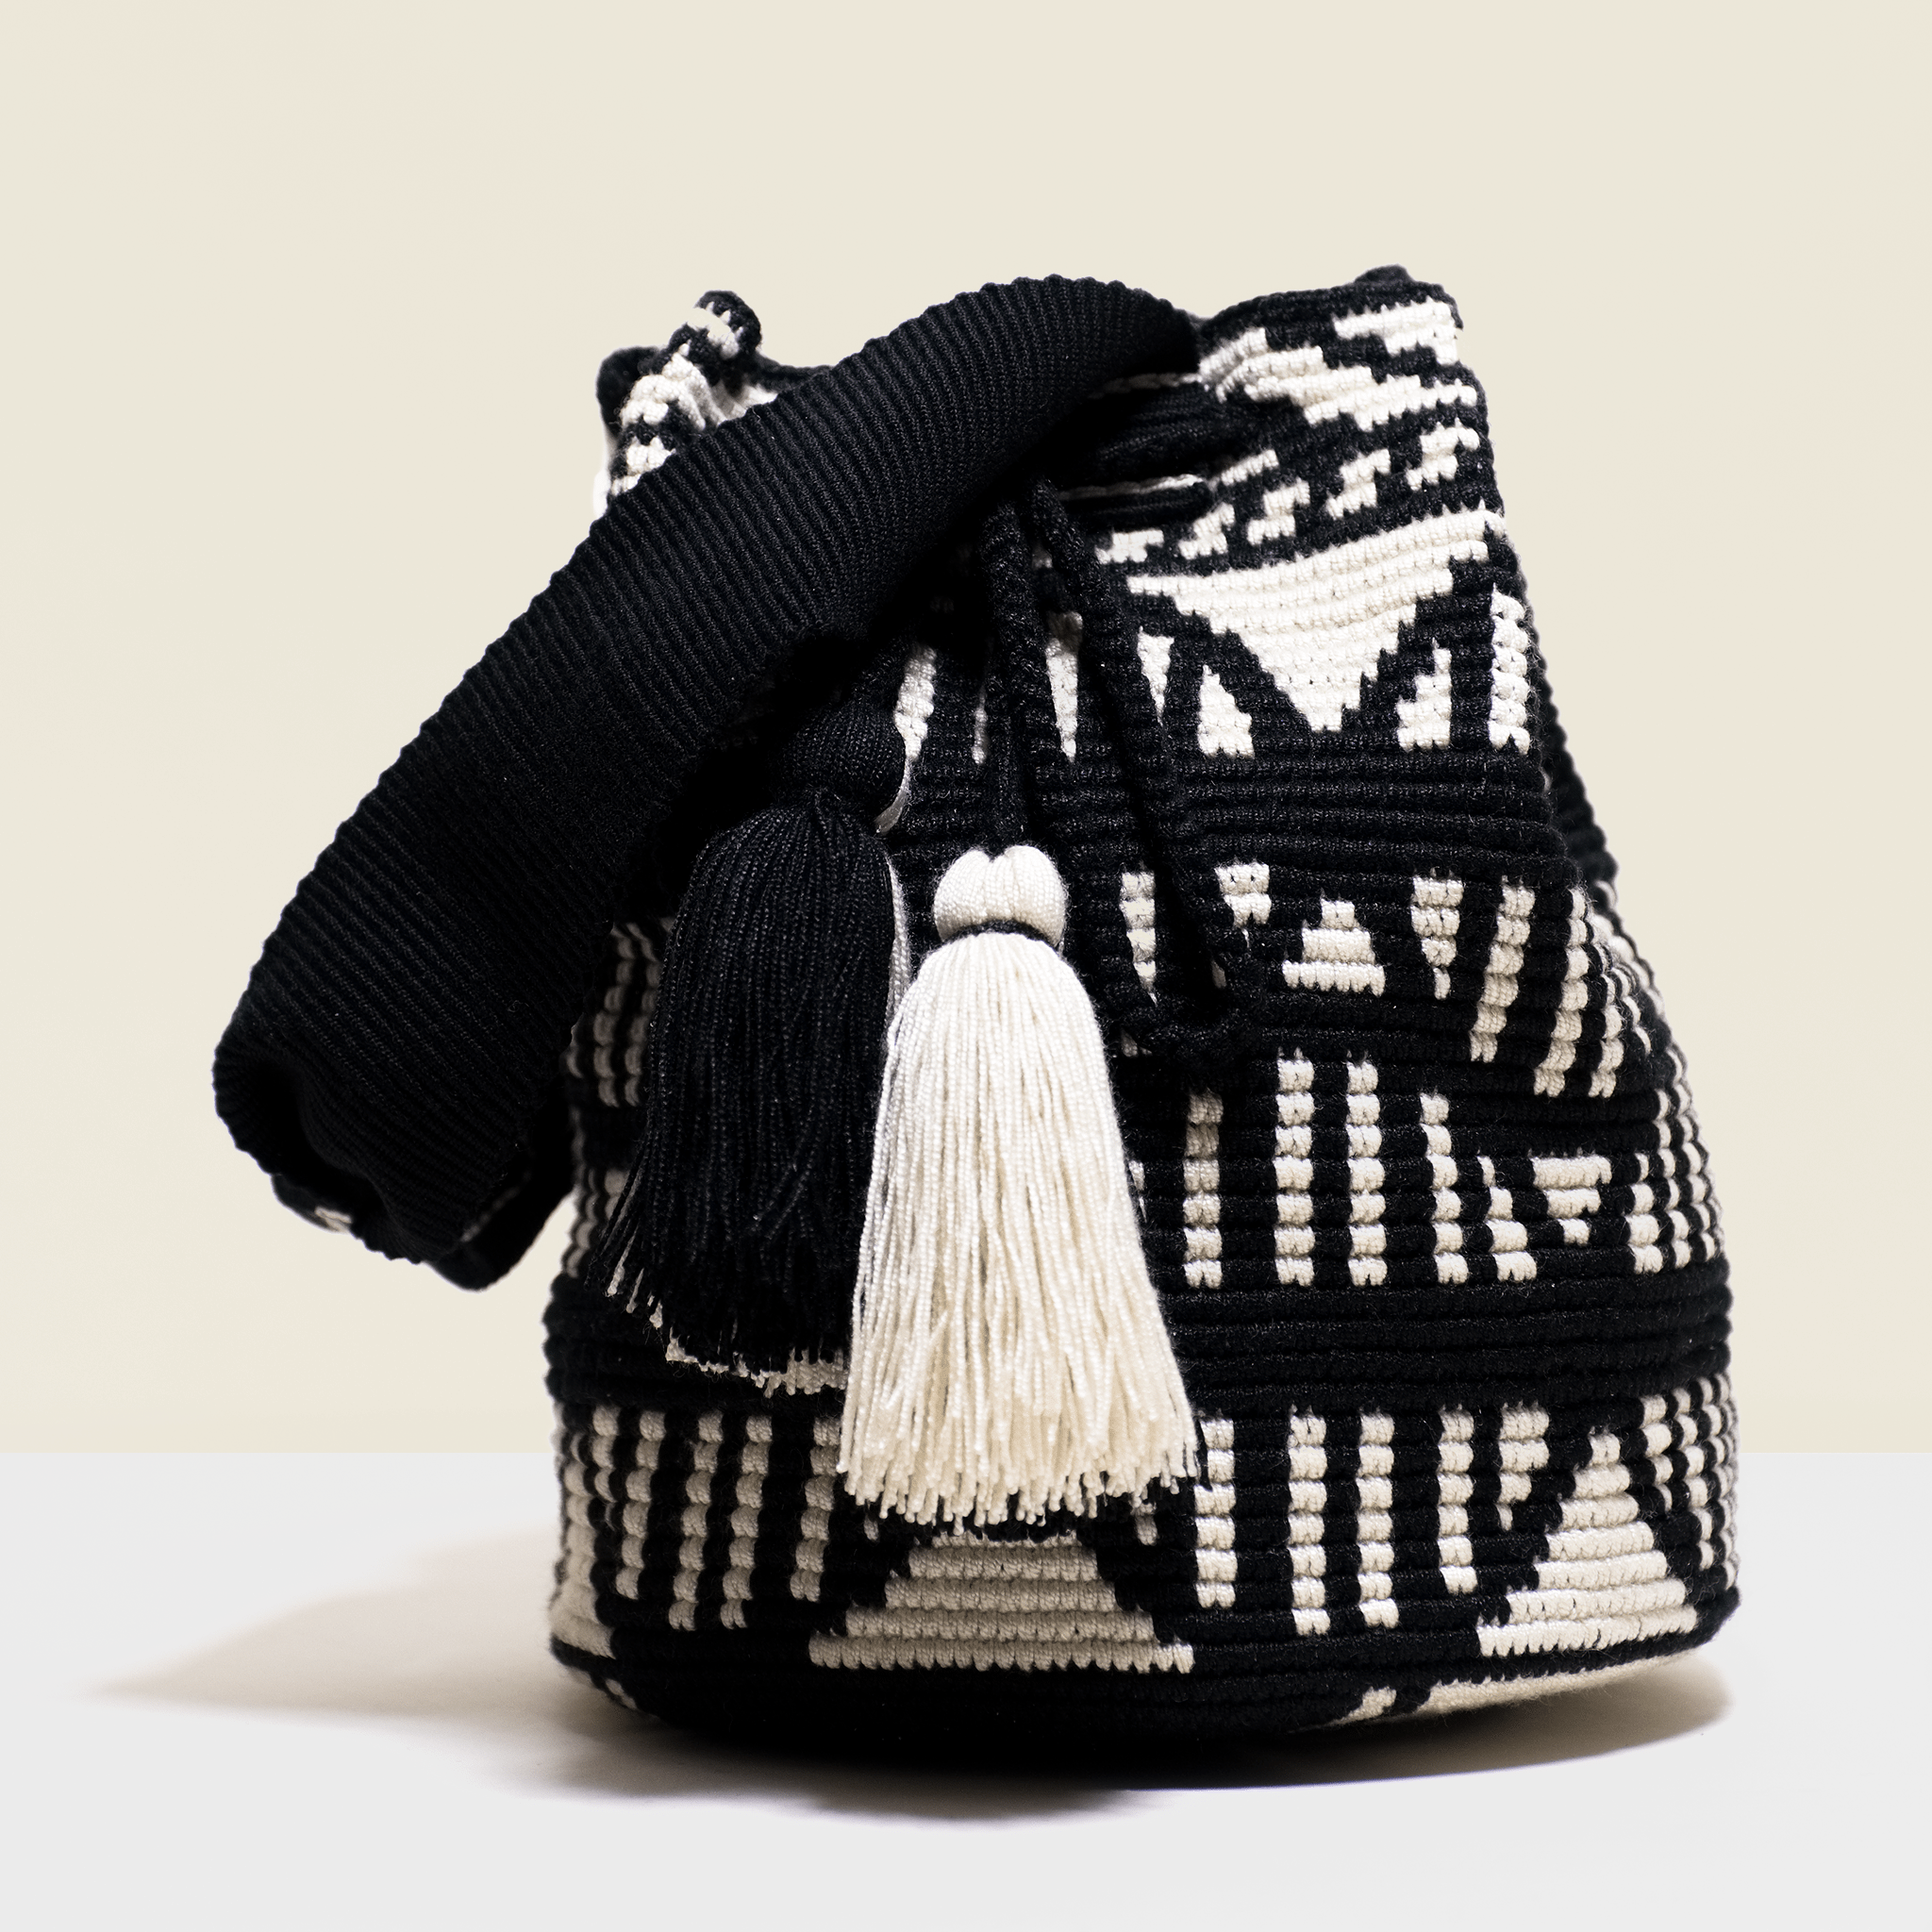 Boho chic bag in white and black with tassels to match